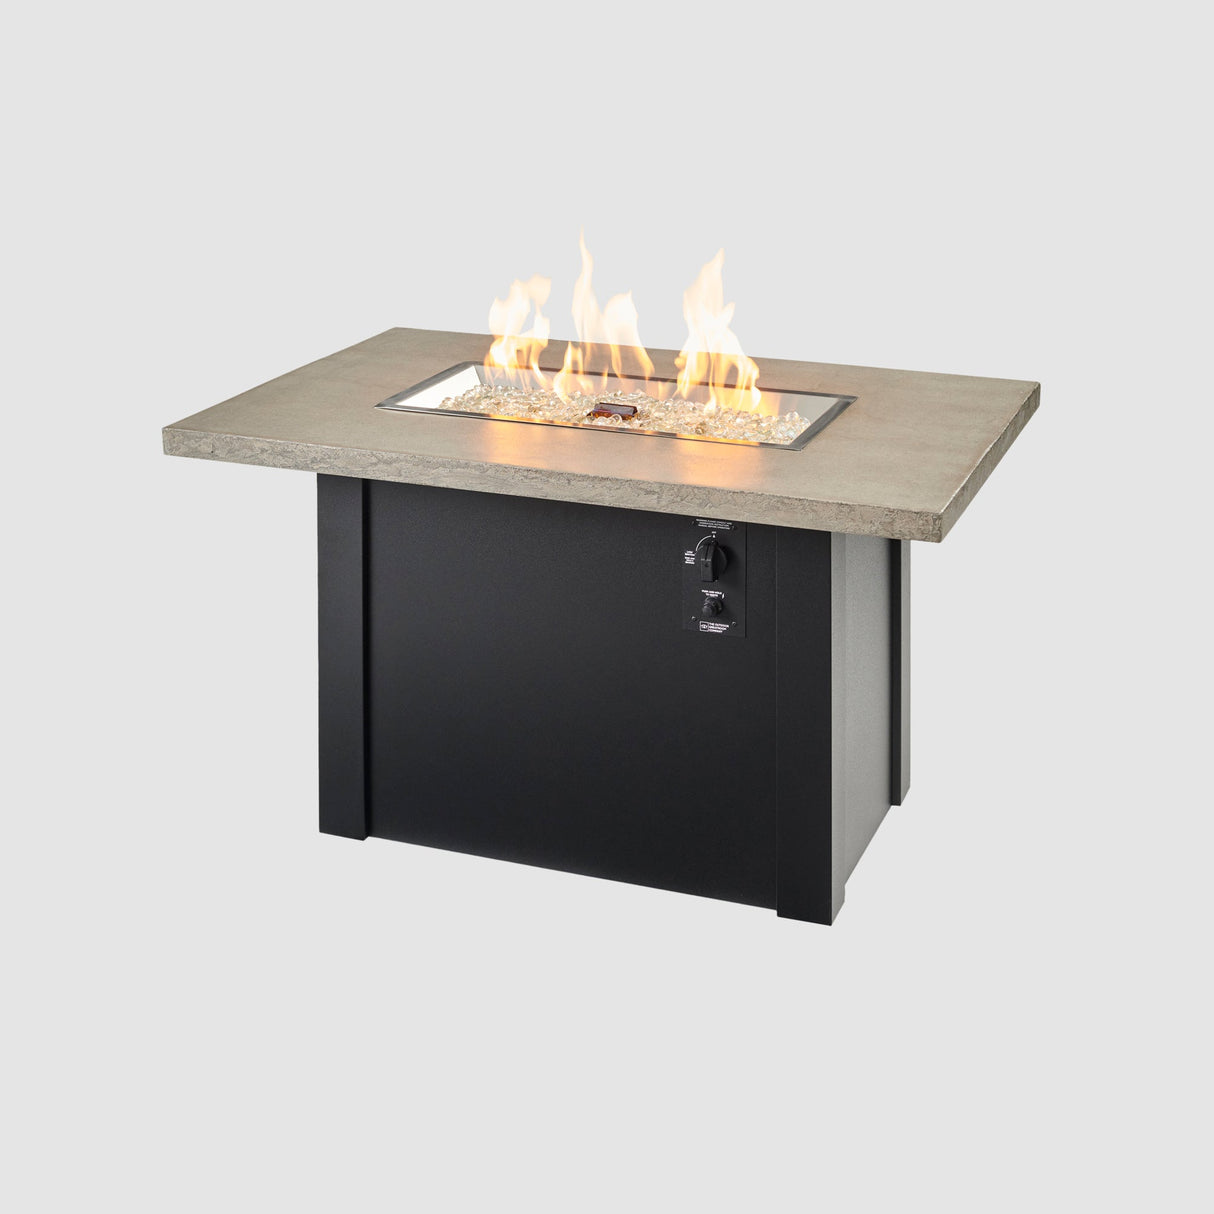 A large flame coming off the burner of a Havenwood Rectangular Gas Fire Pit Table with a Pebble Grey top and Luverne Black base